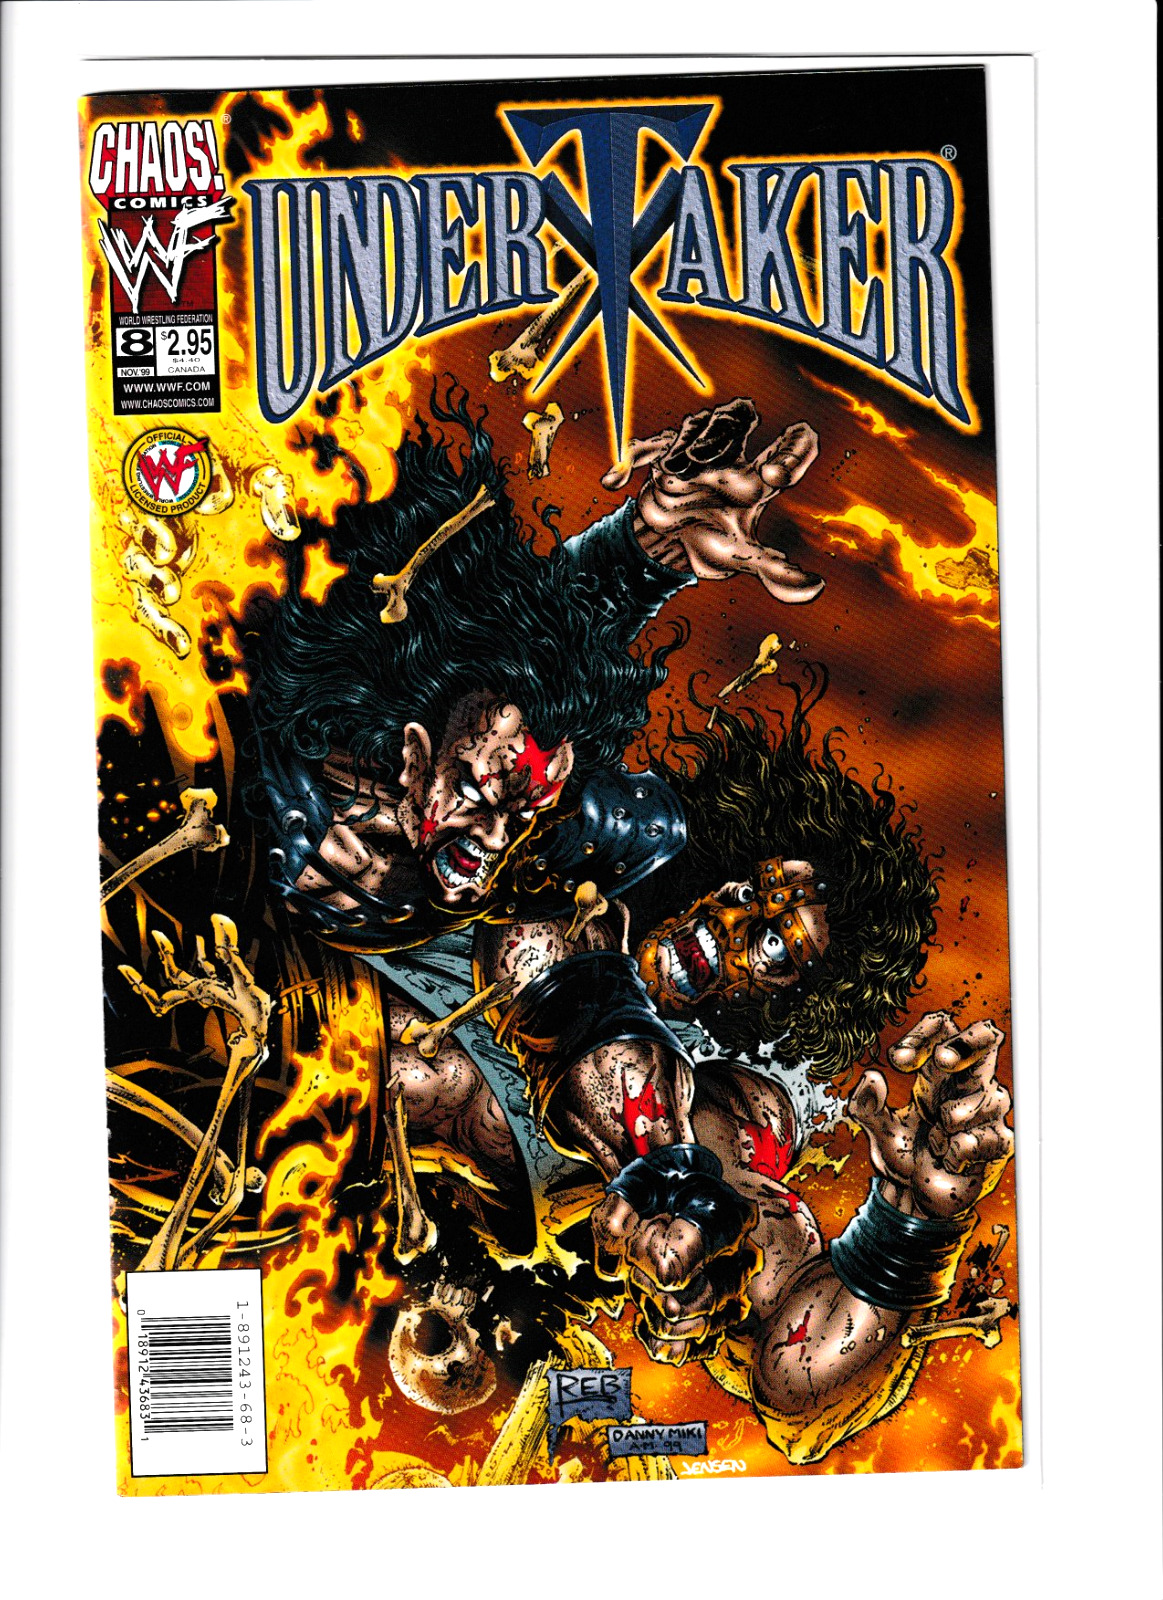 WWF WWE UNDERTAKER #8 CHAOS COMICS WRESTLING REB COVER NEWSTAND WOW  A74